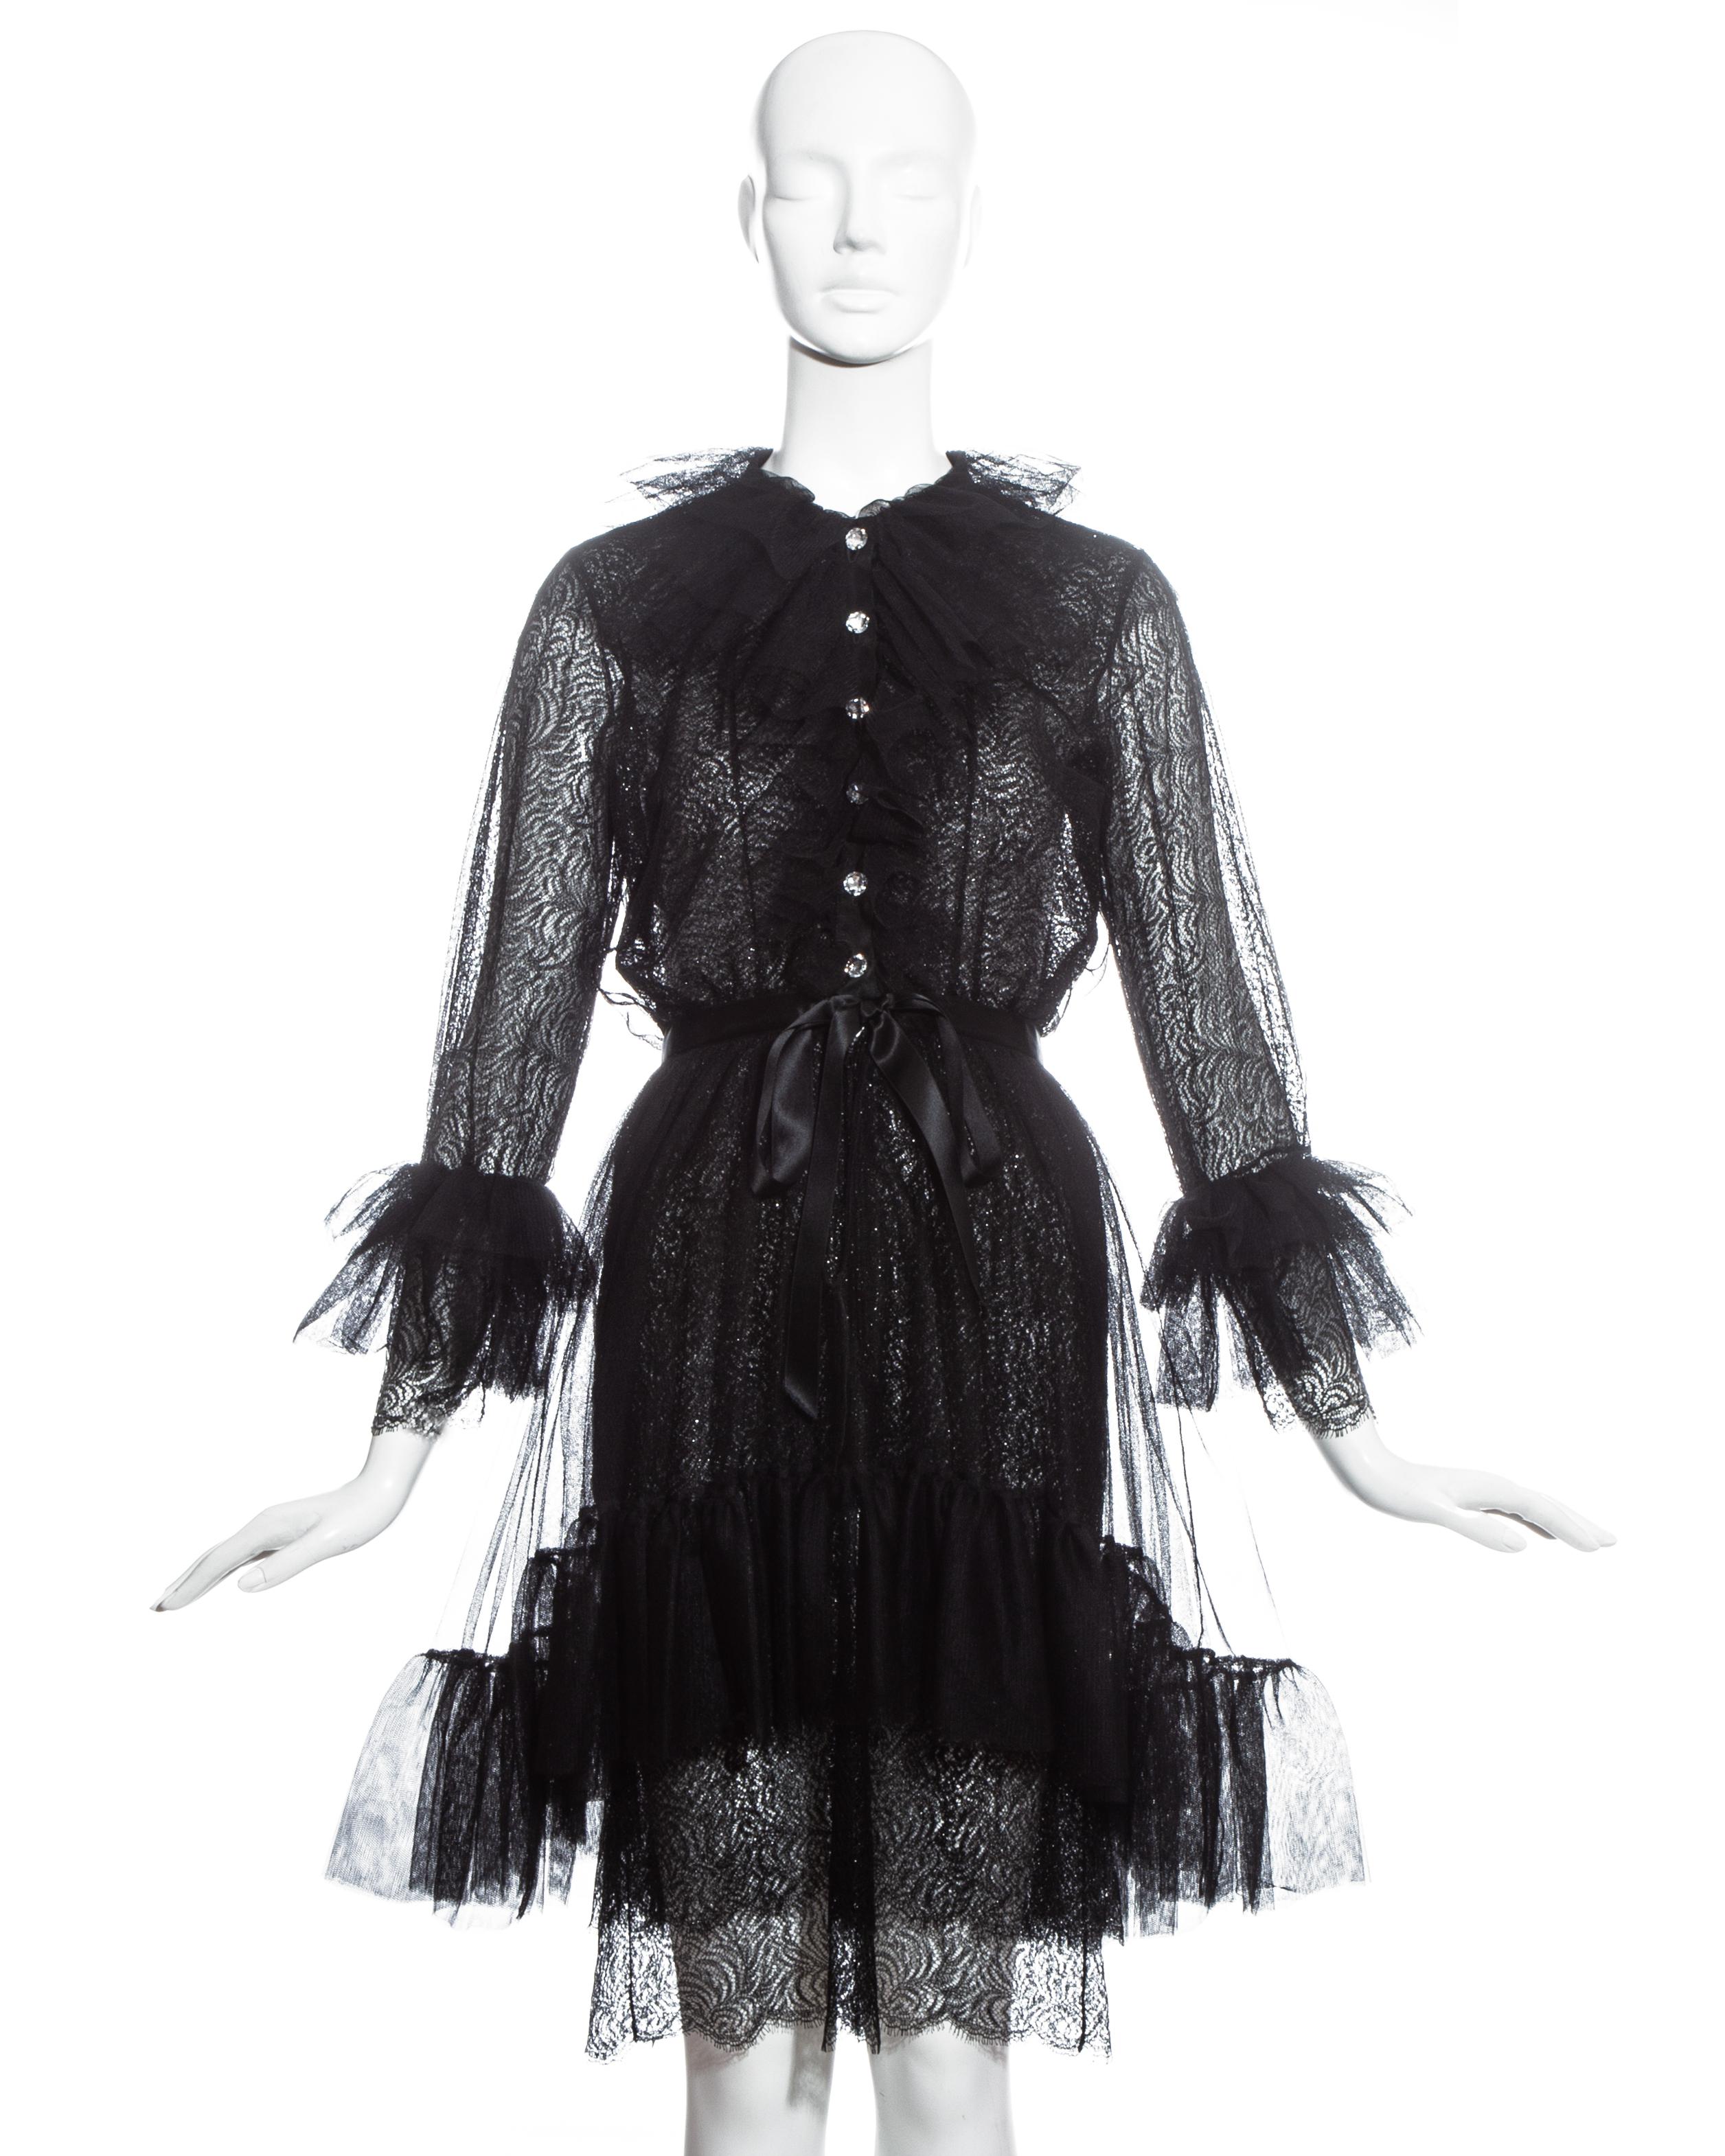 Yves Saint Laurent black lace and tulle cocktail dress with crystal buttons, detachable silk slip dress, silk bow belt and ruffled collar, skirt and cuffs.

Fall-Winter 1993